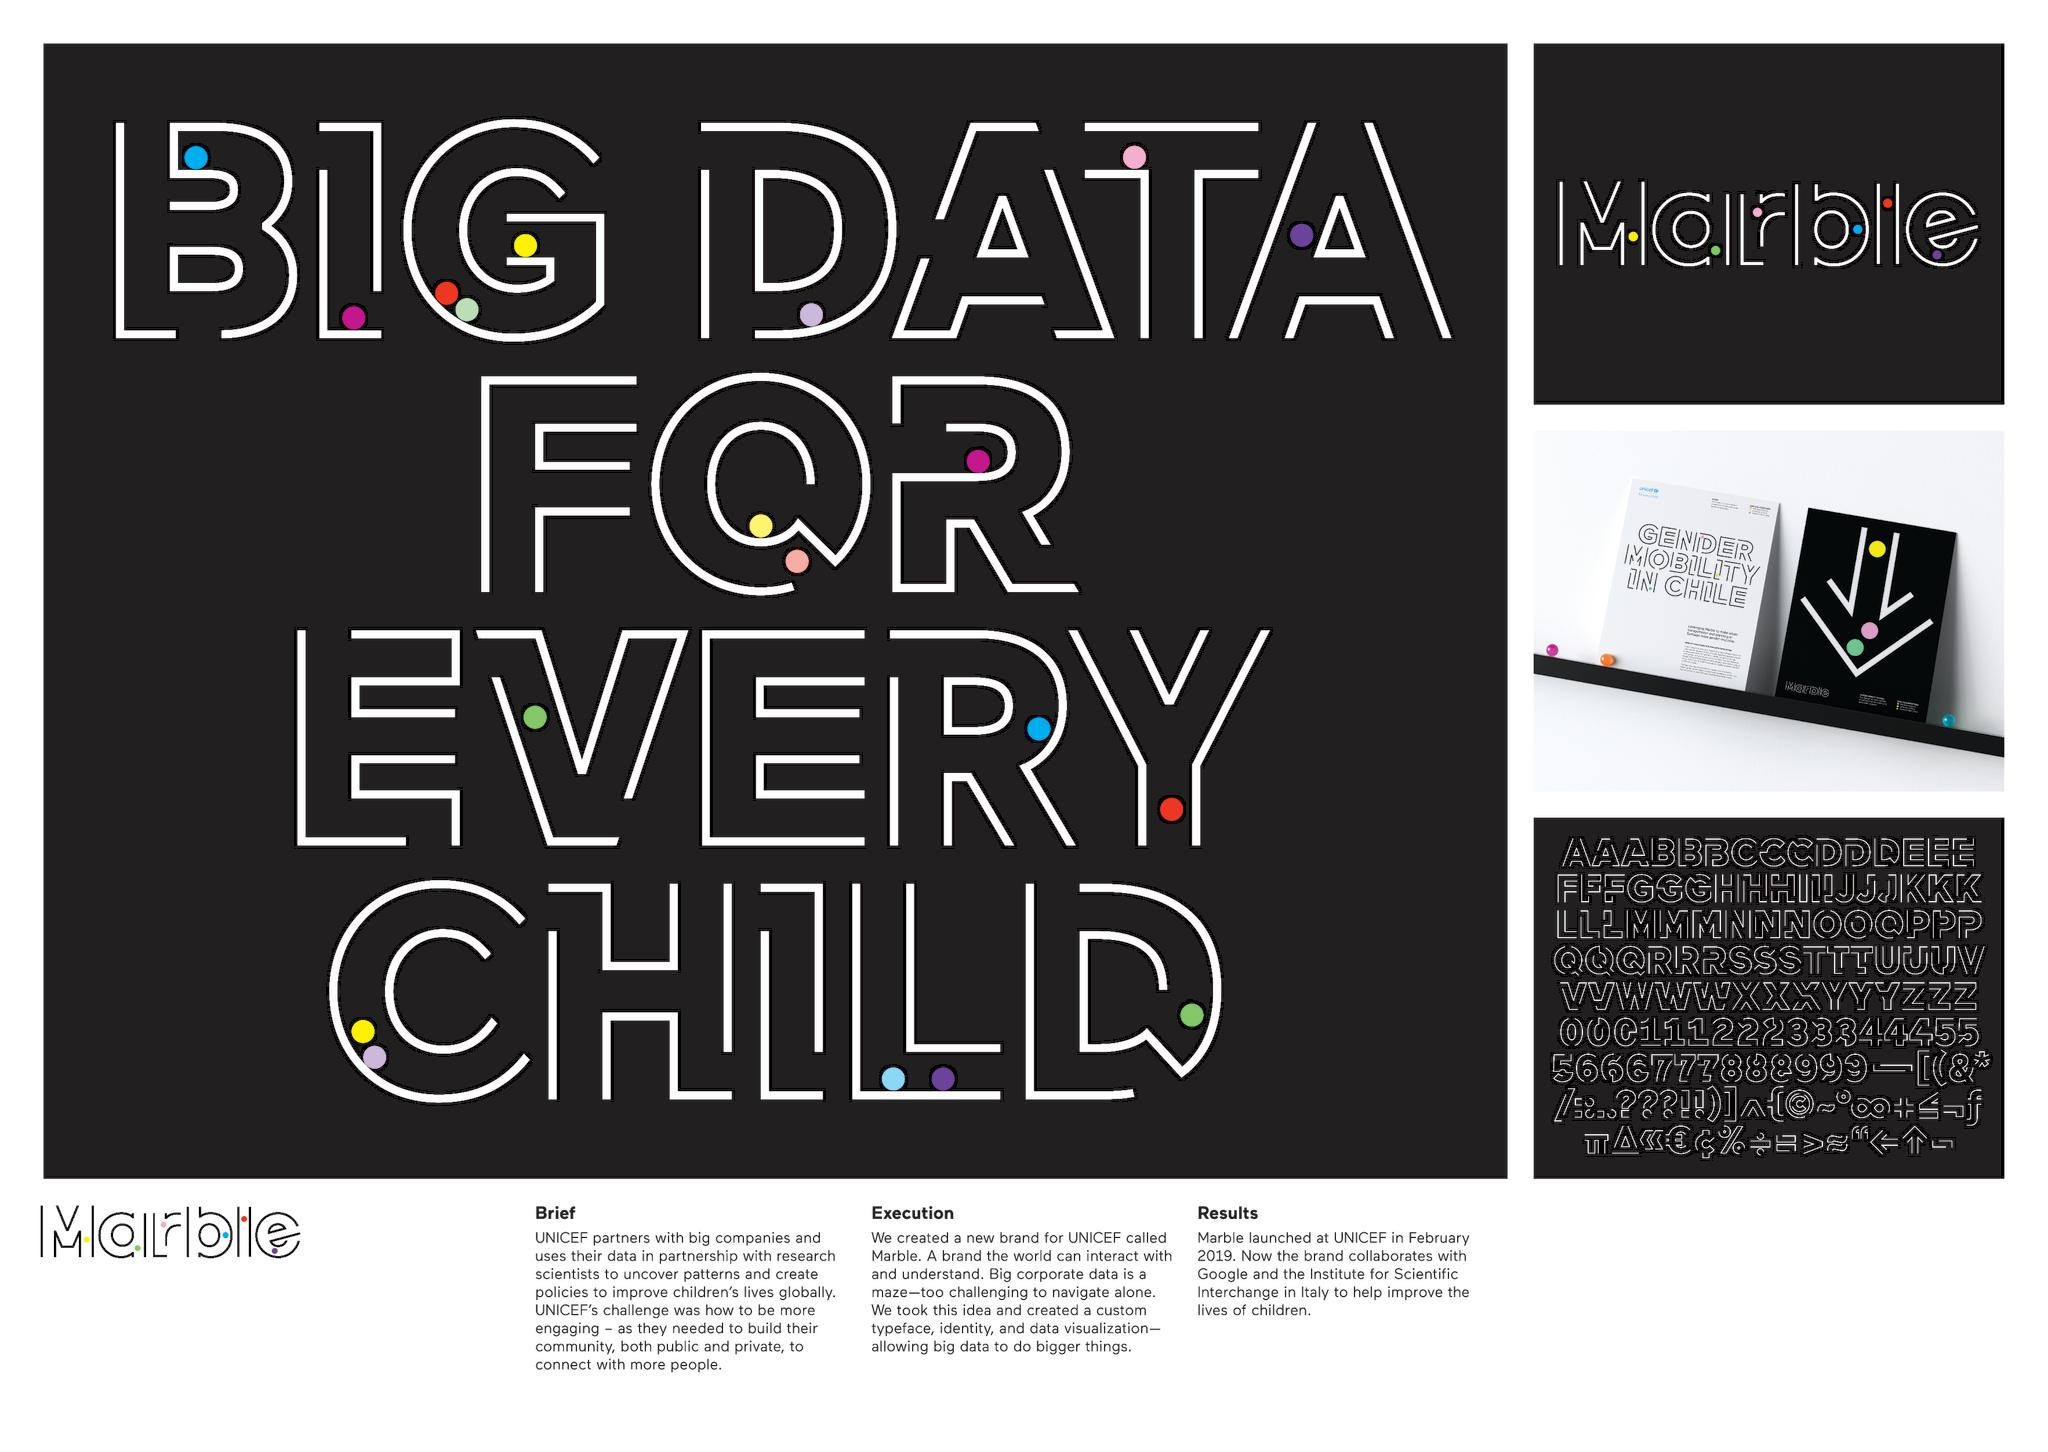 Marble: Big Data For Every Child